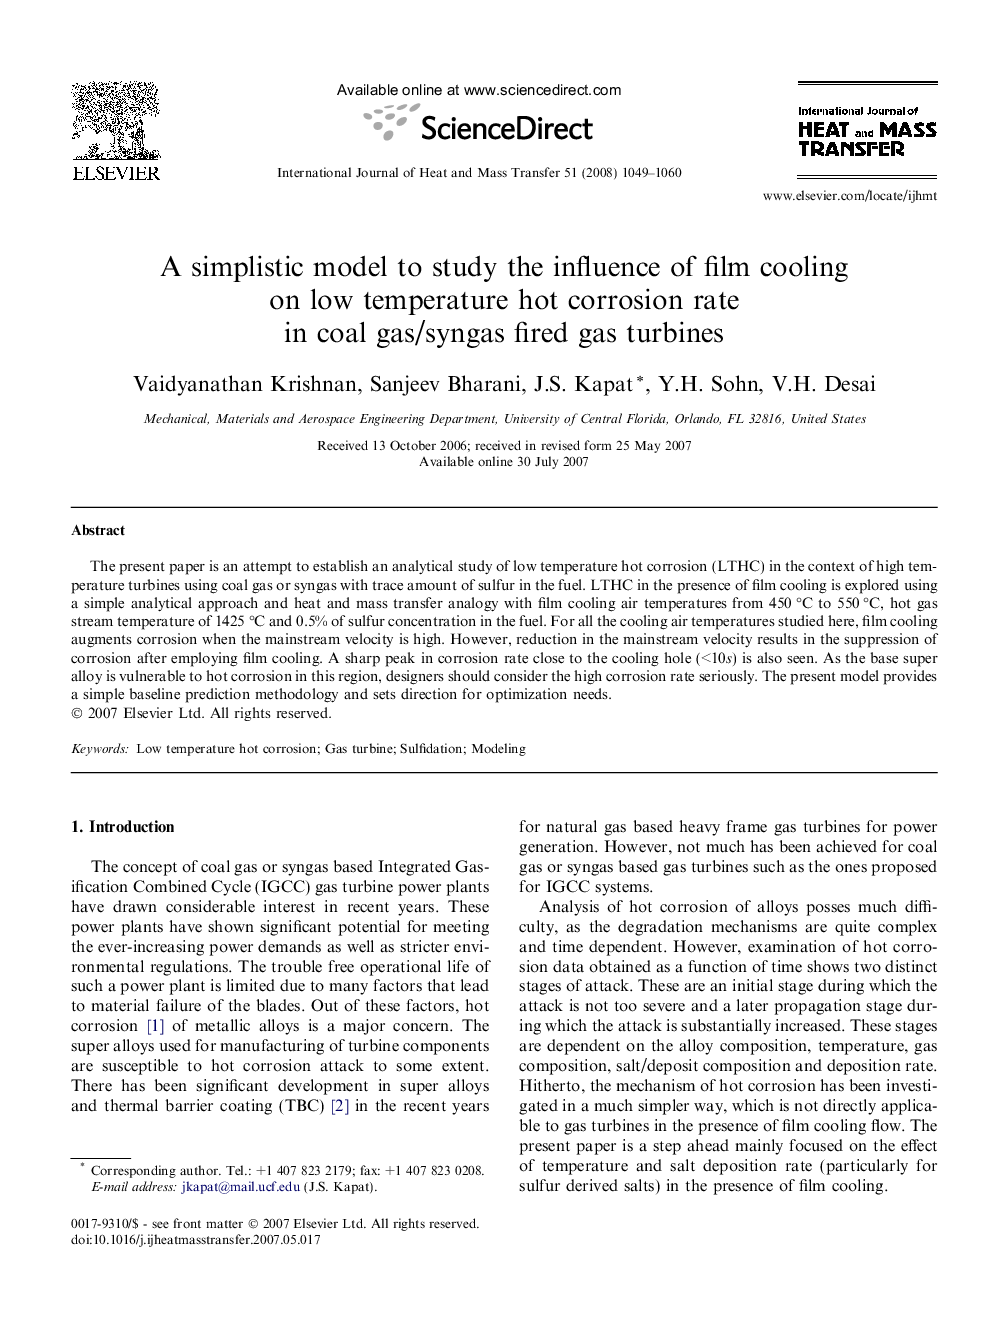 A simplistic model to study the influence of film cooling on low temperature hot corrosion rate in coal gas/syngas fired gas turbines